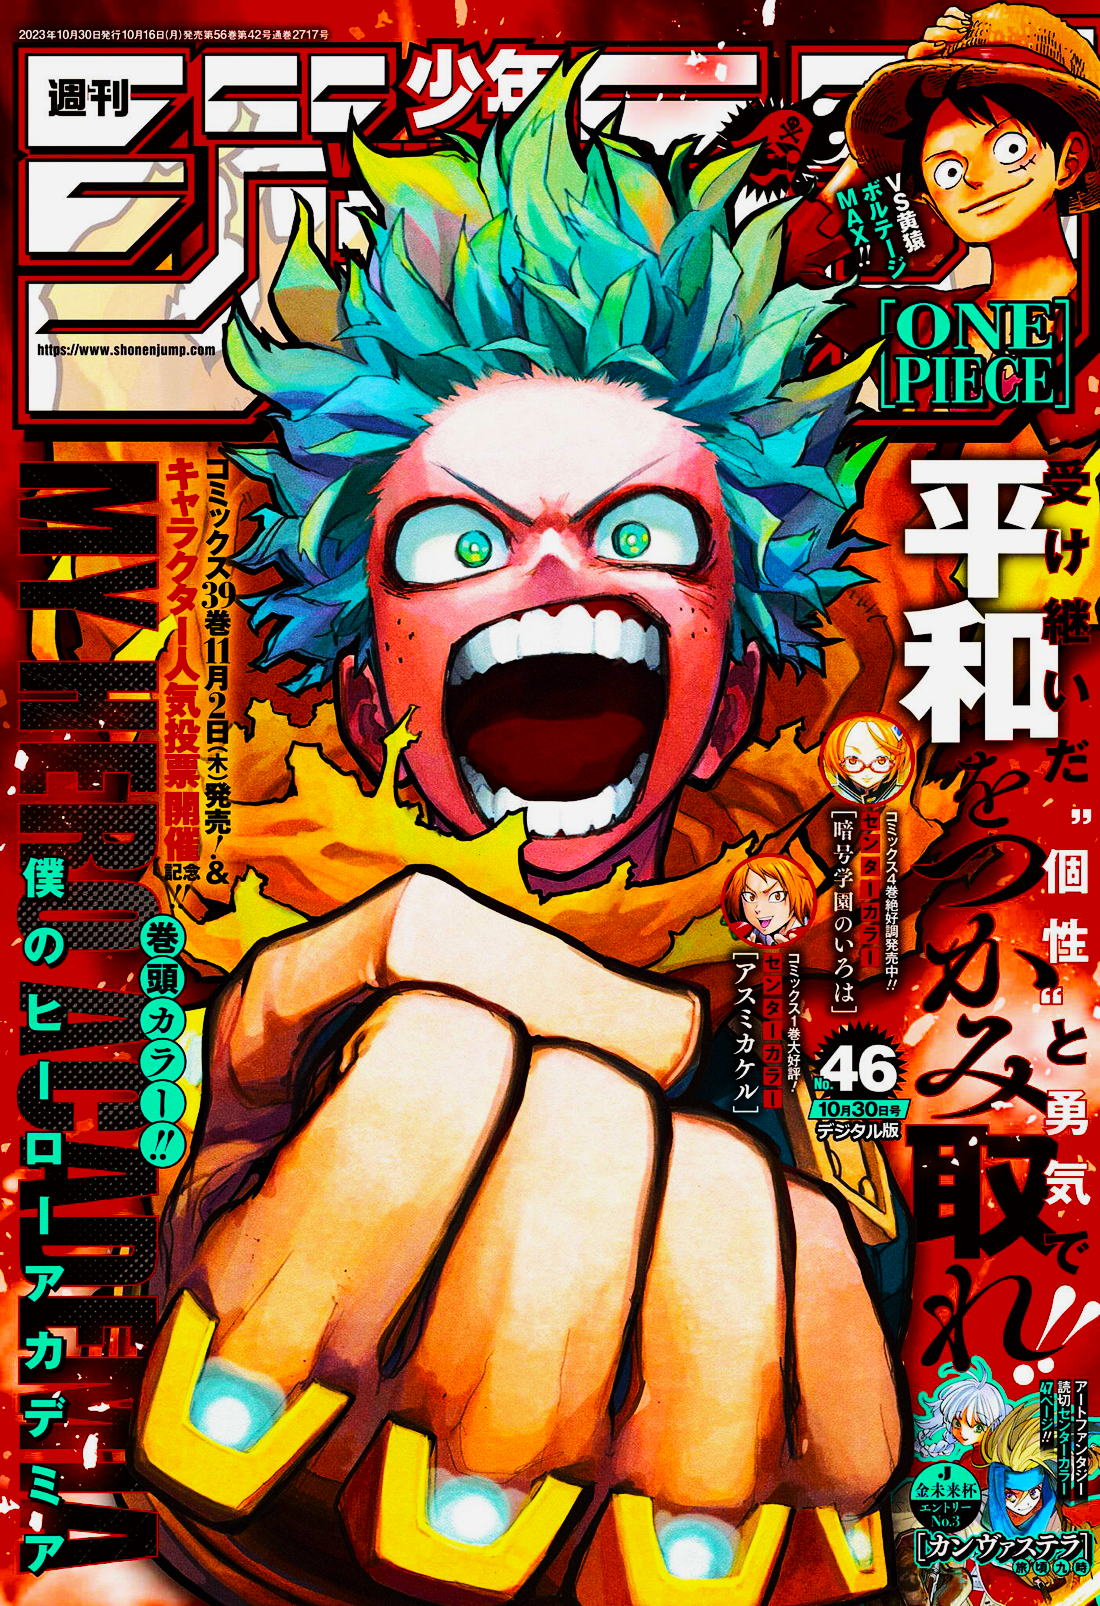 My Hero Academia Chapter 403 SHORT REVIEW